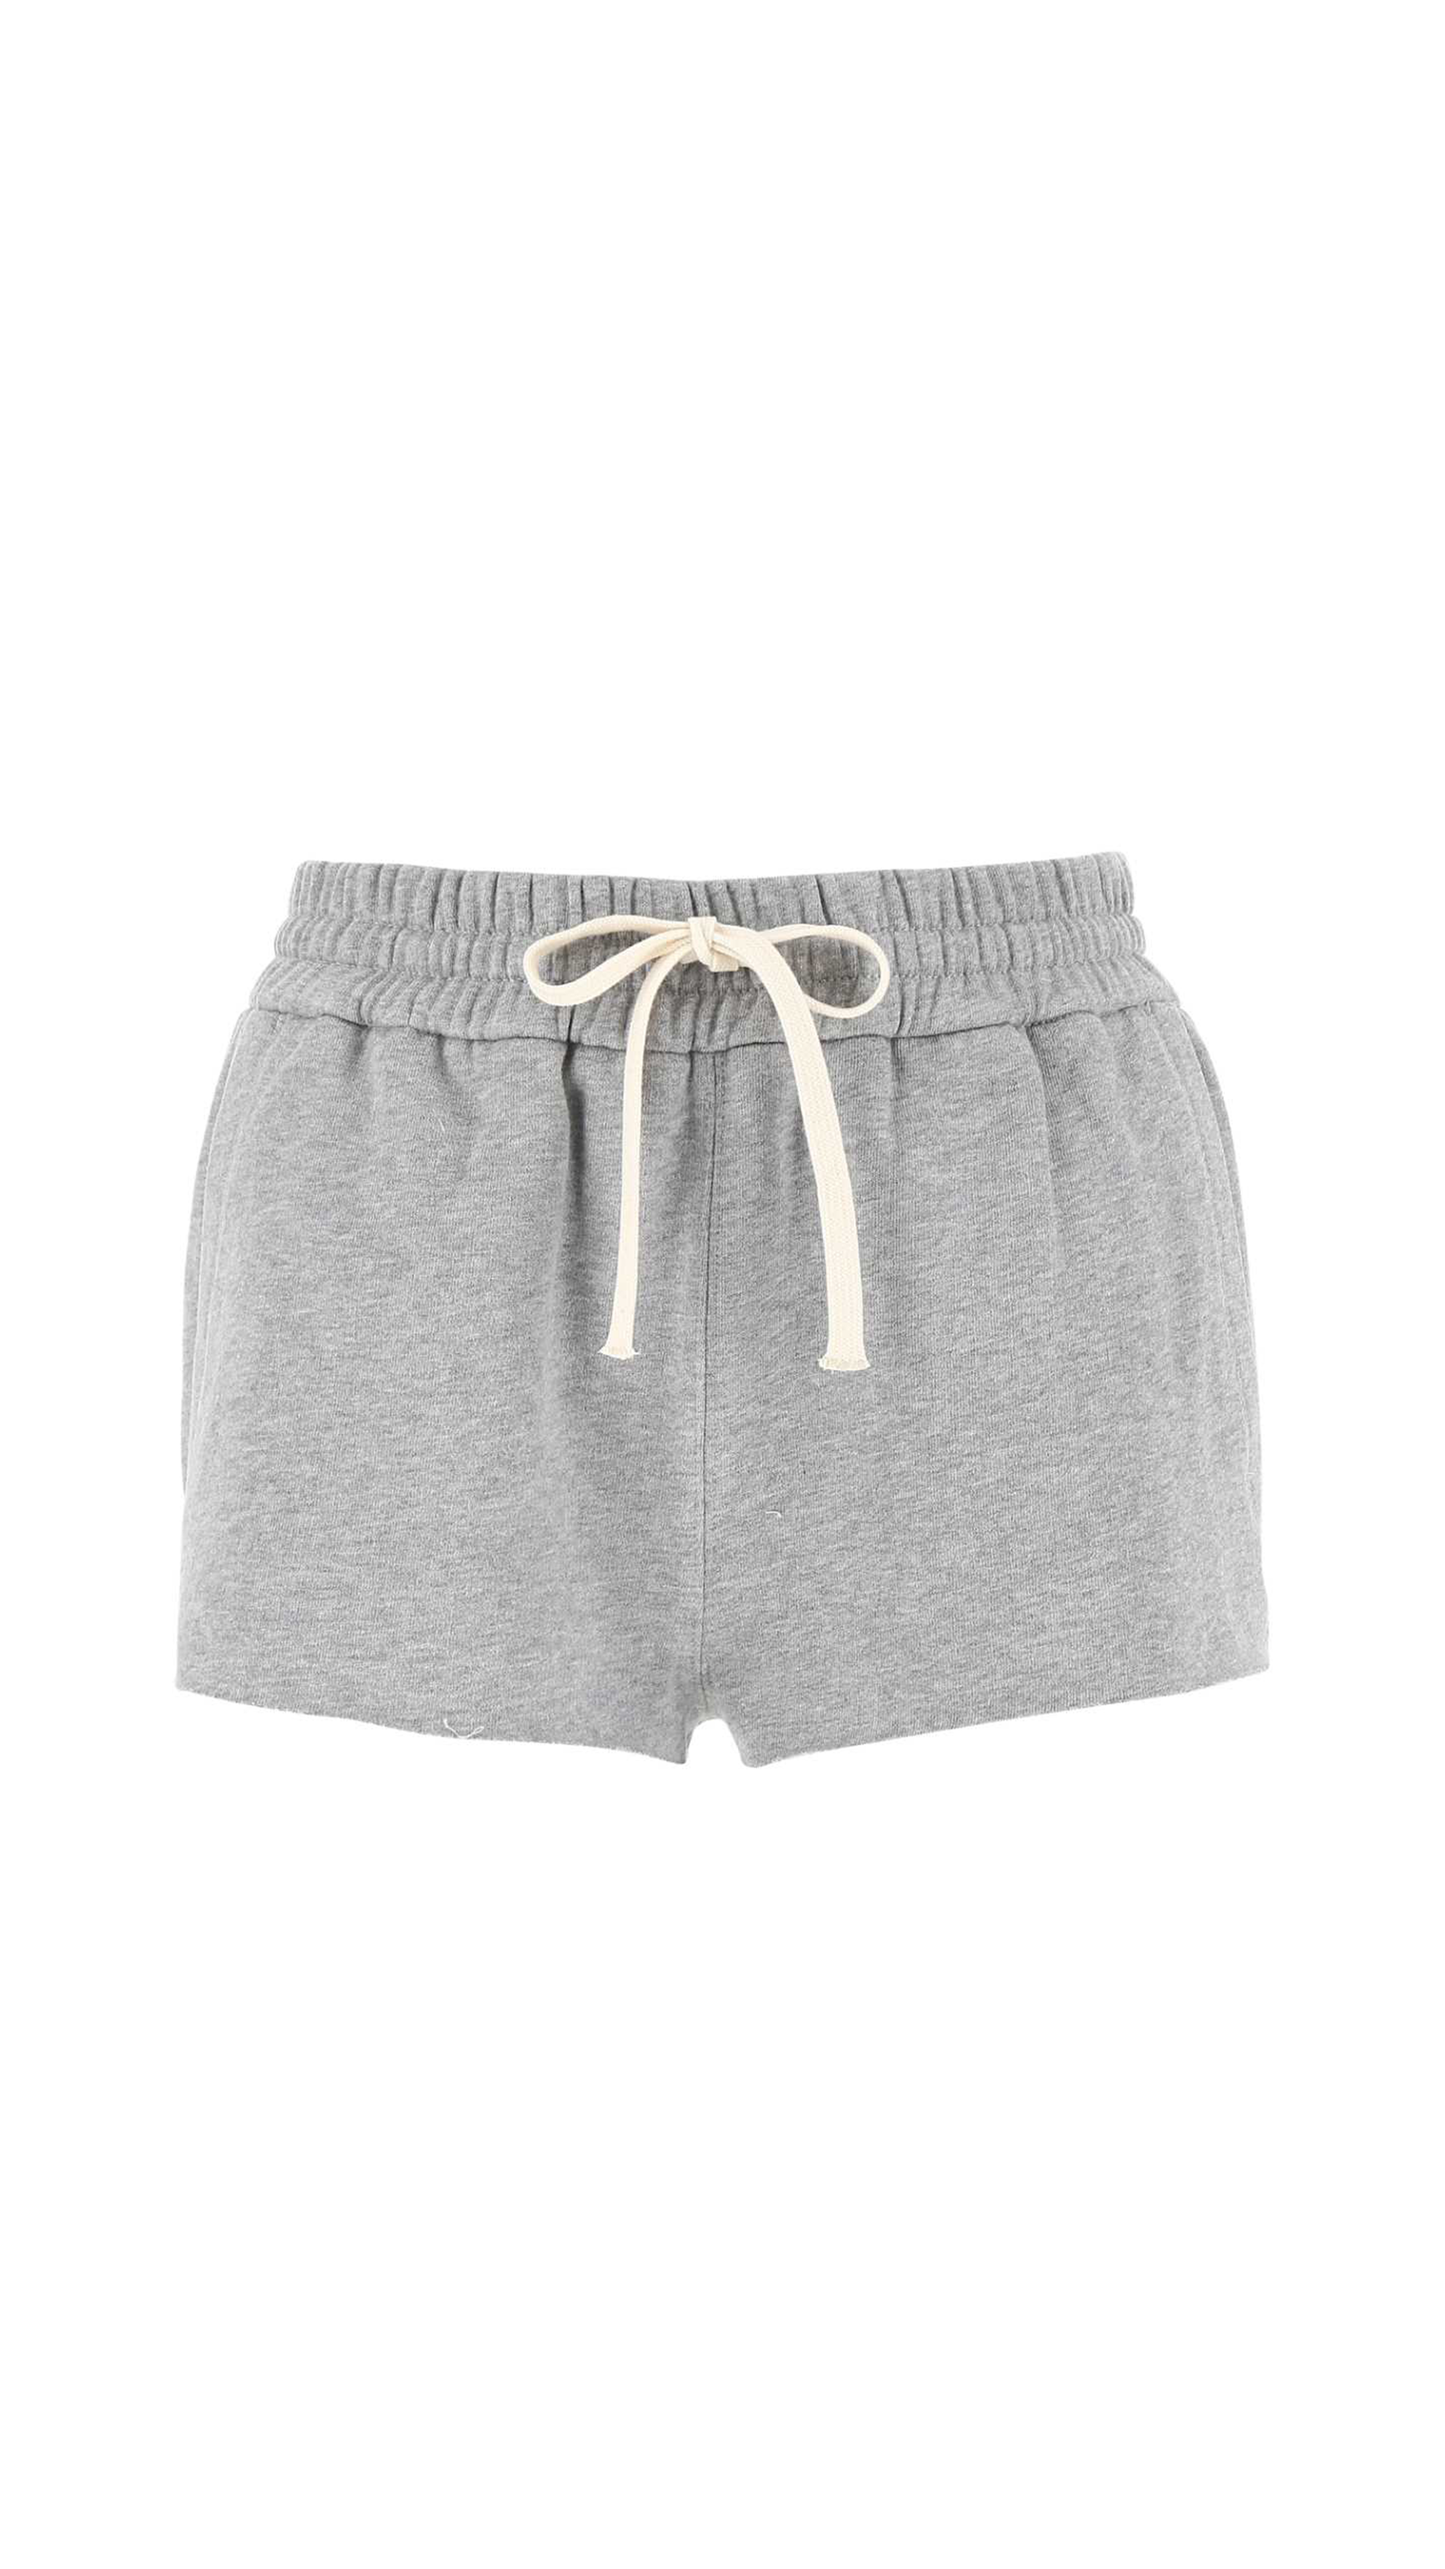 Embroidered Cotton Shorts - Grey